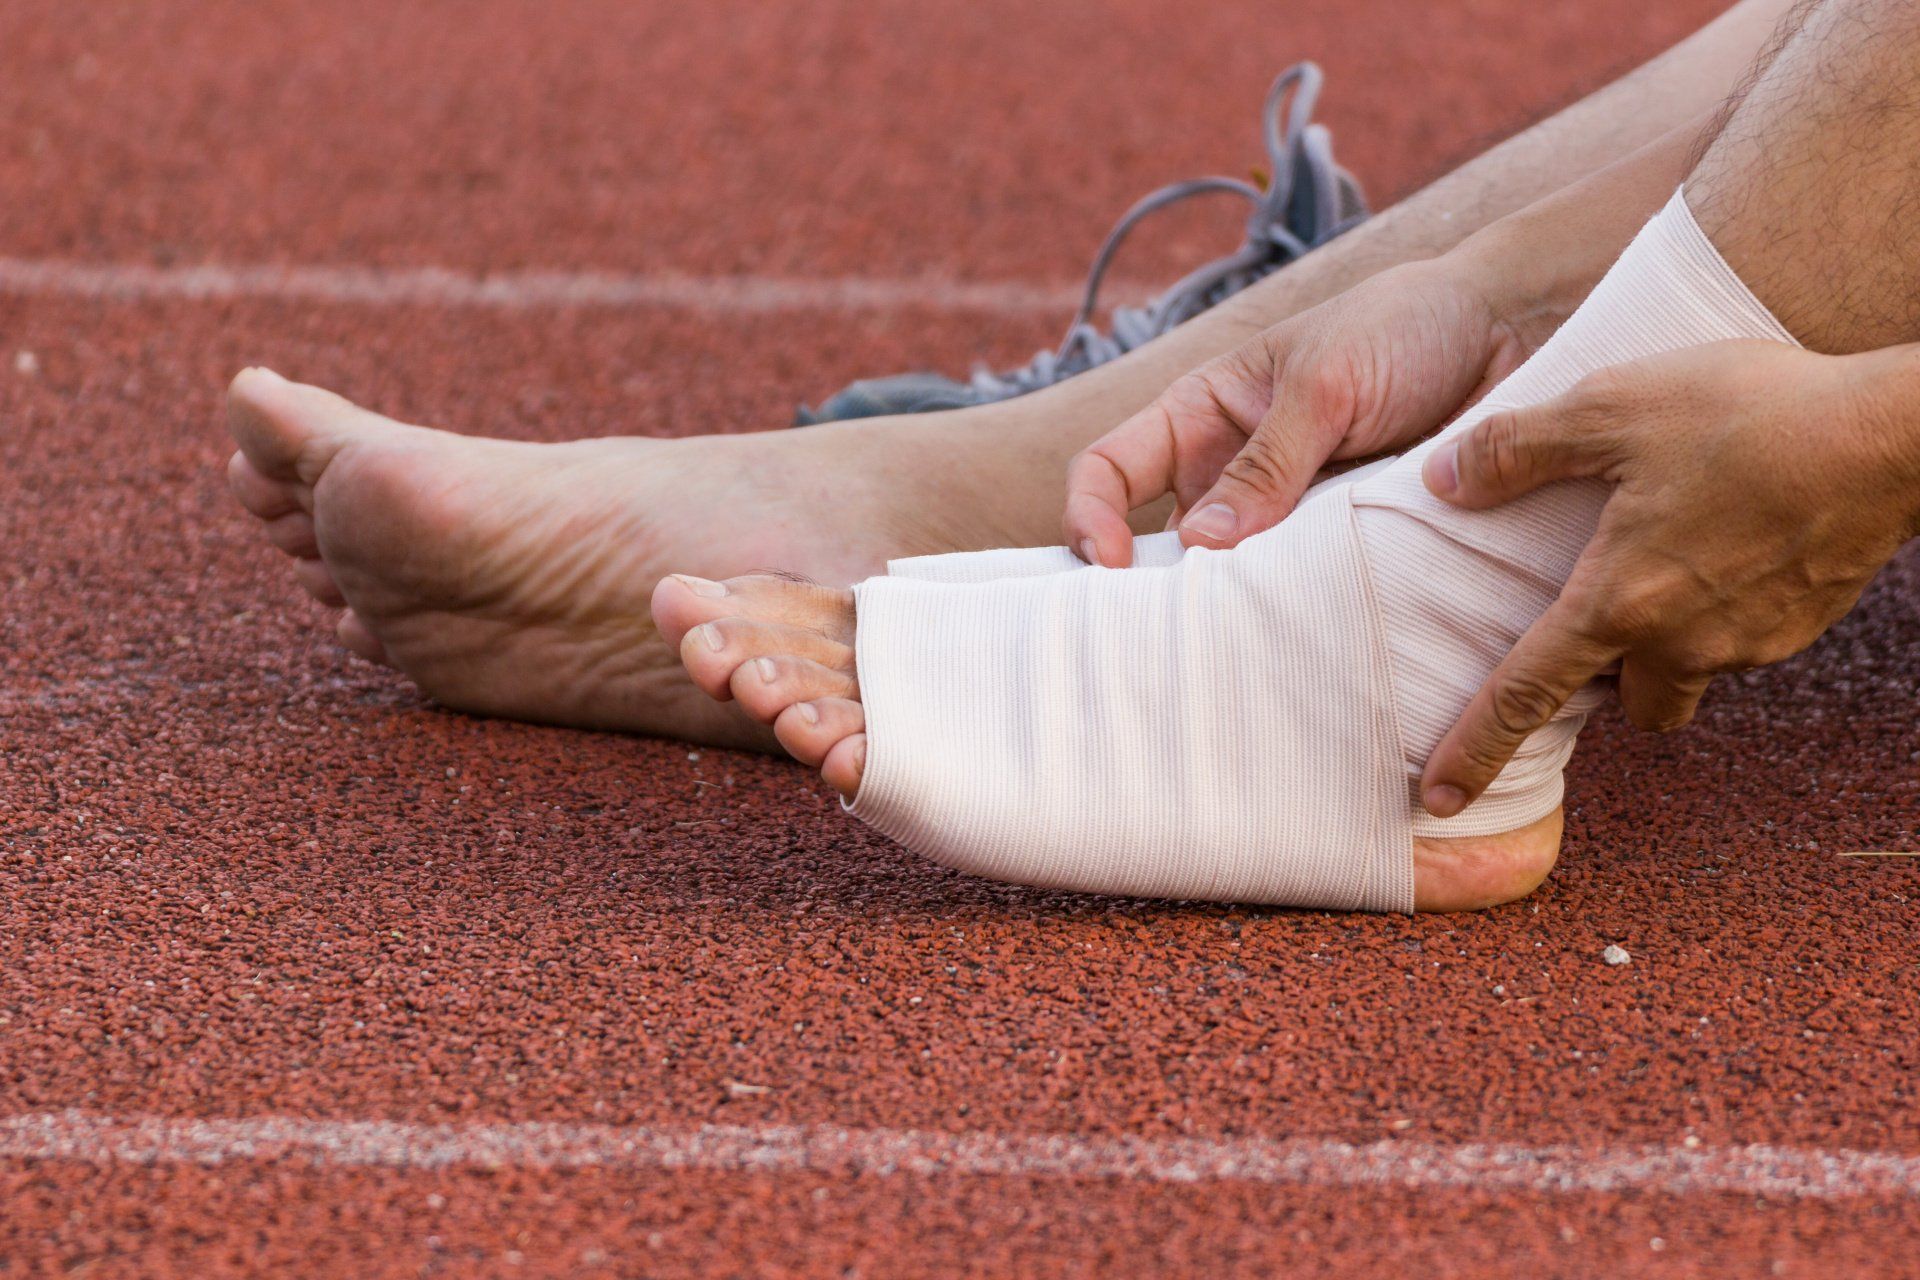 Grades Of Ankle Sprains Explained